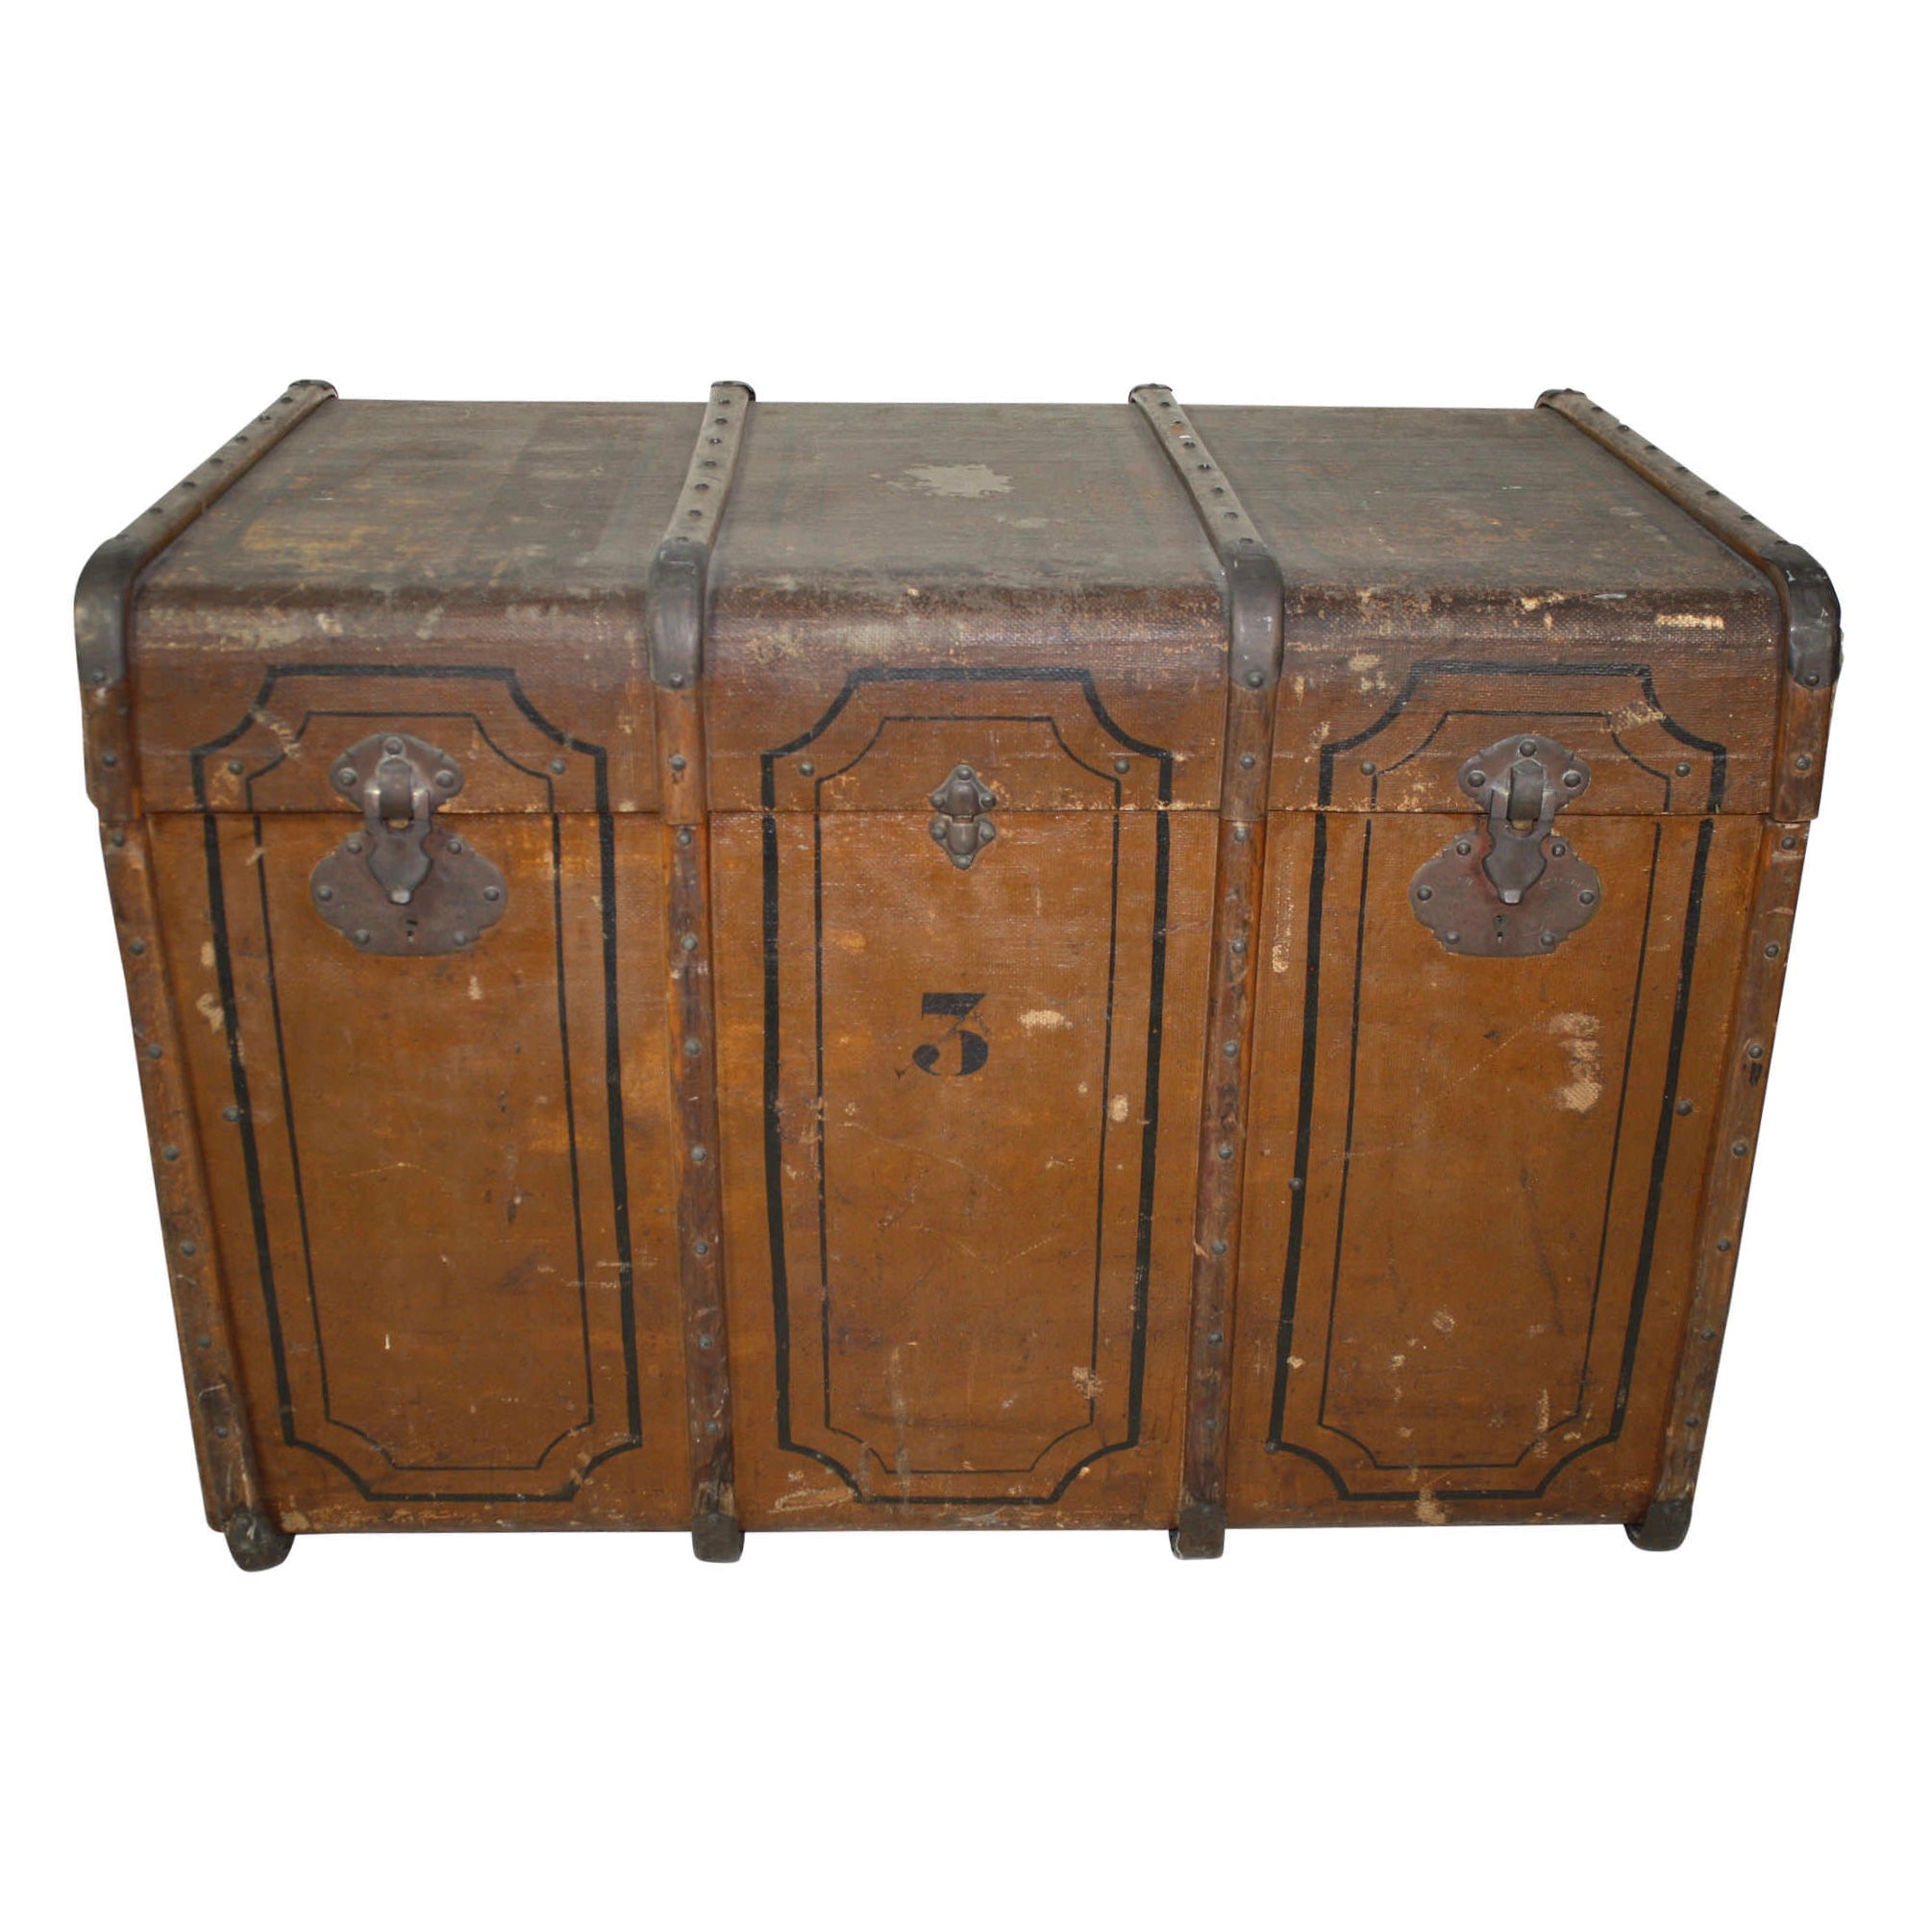 Romanian Canvas Steamer Trunk with Trays